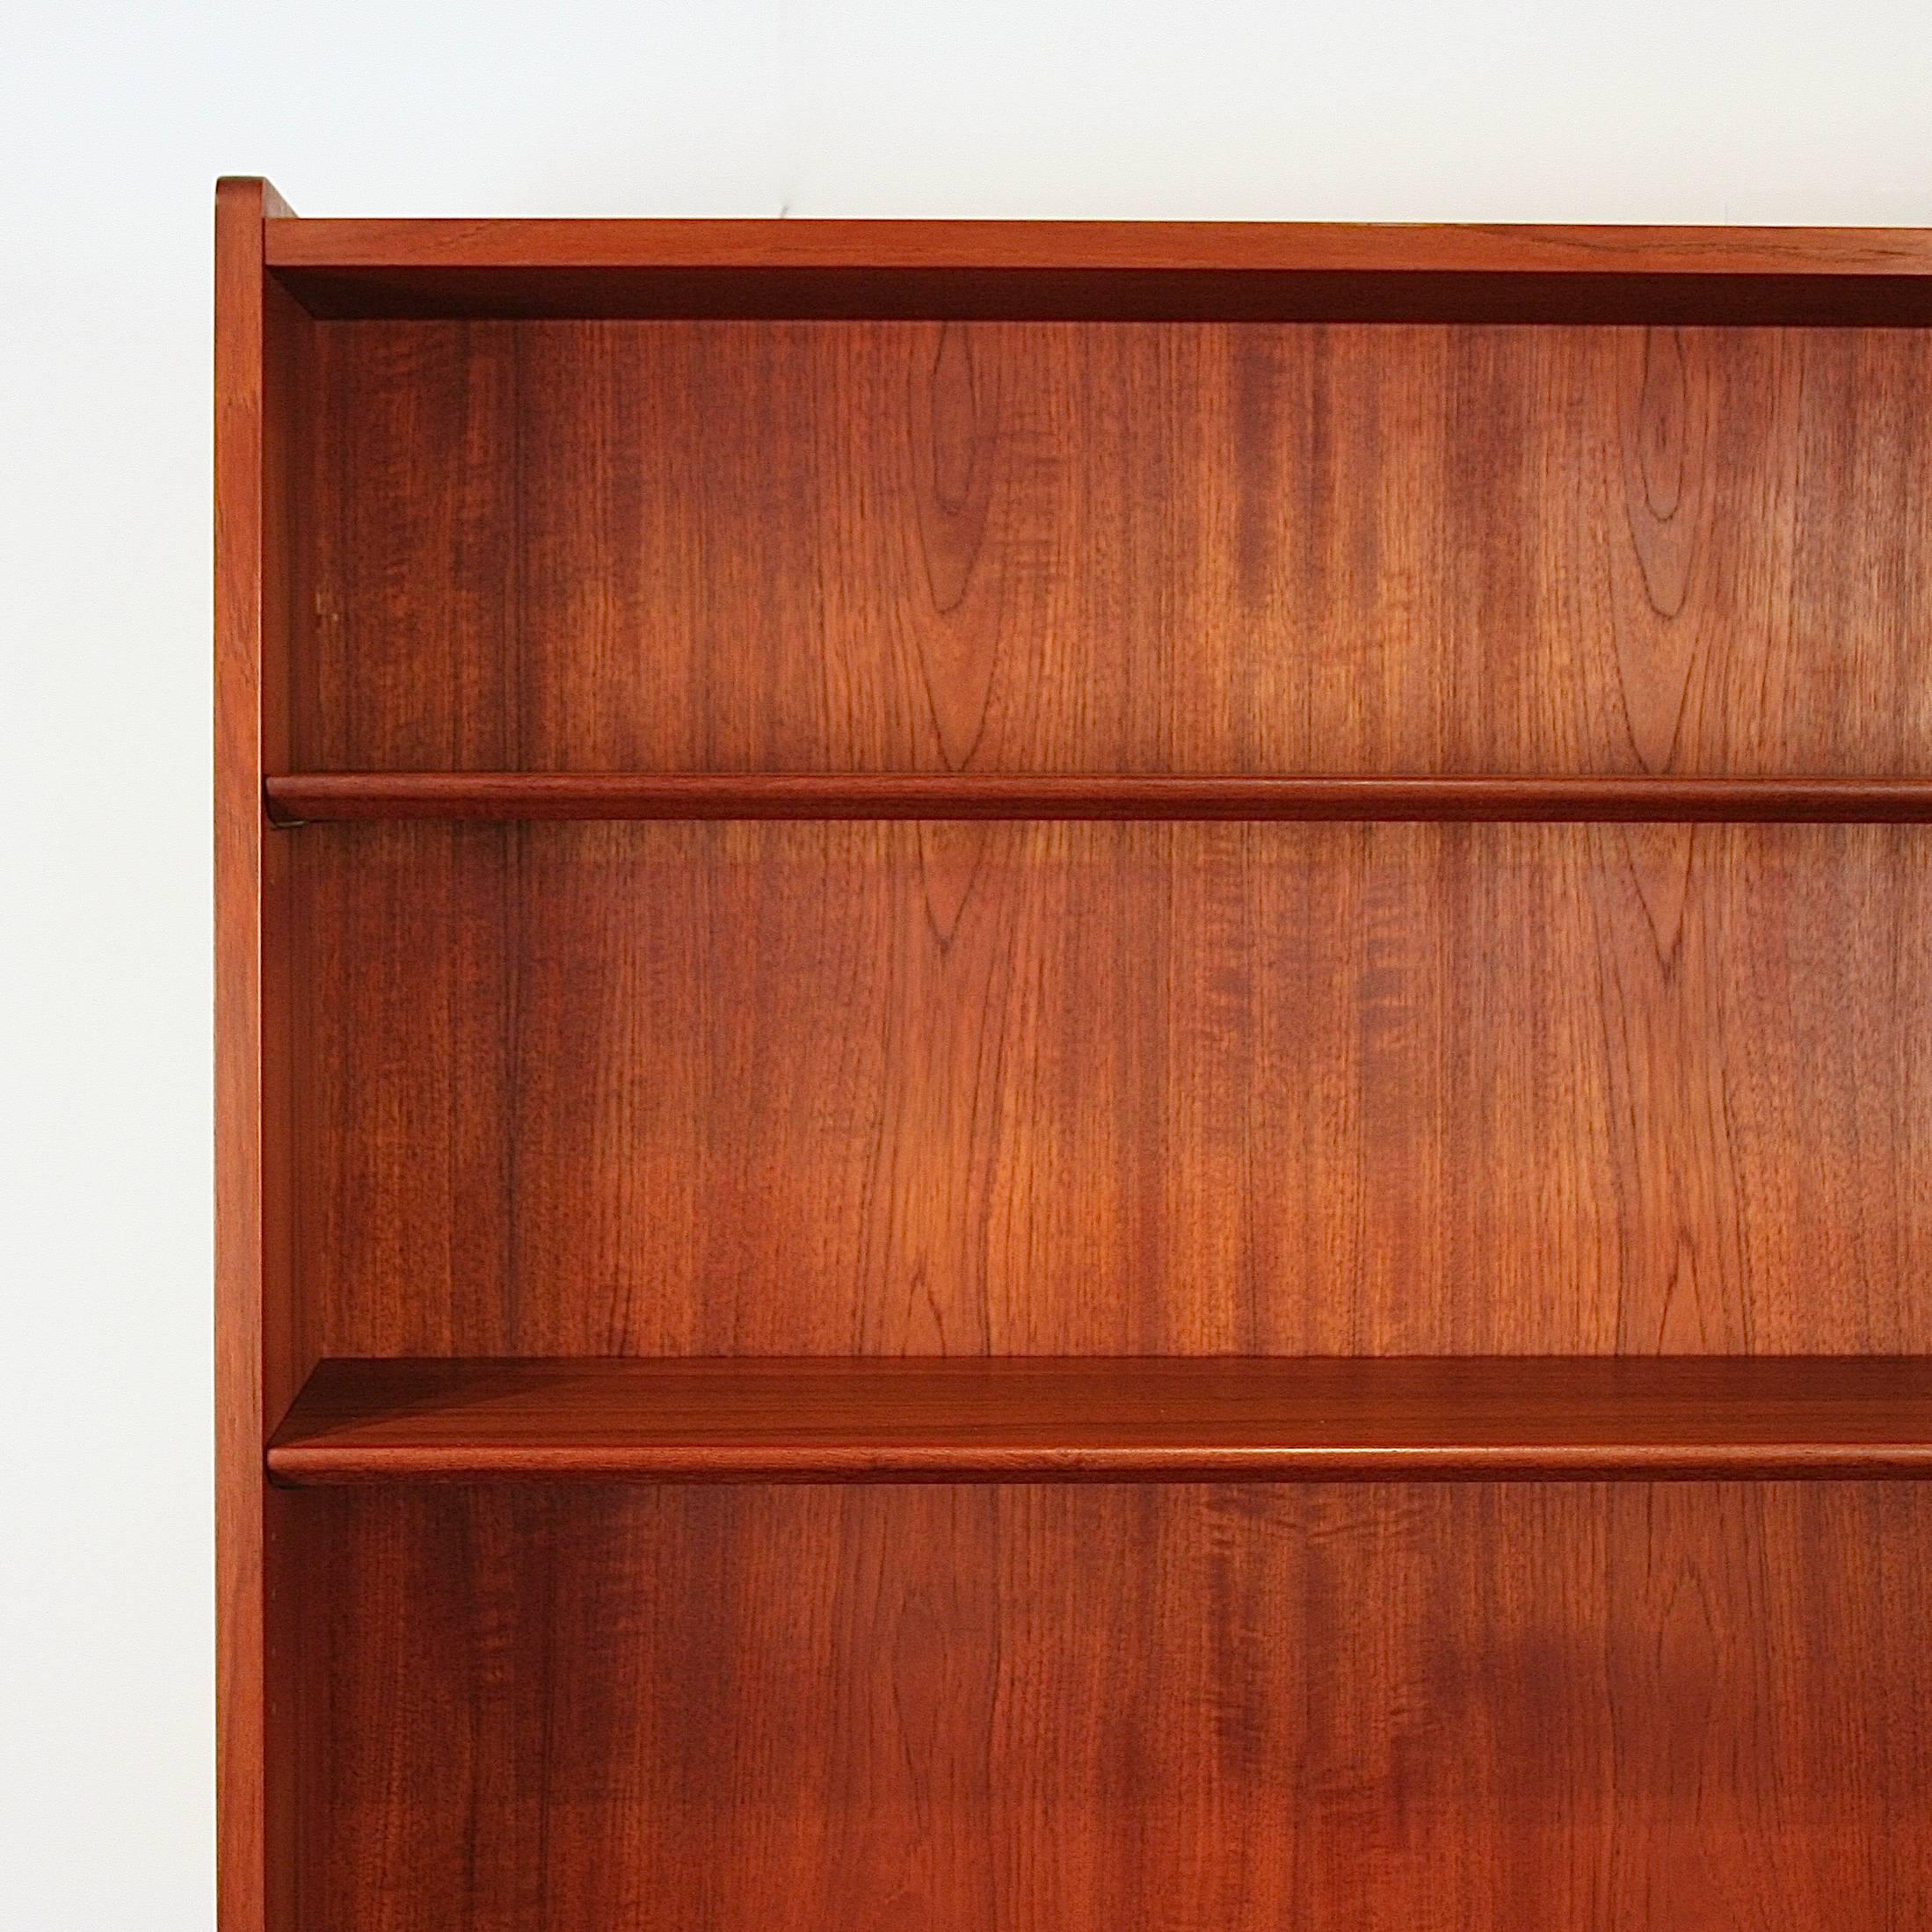 Vintage Danish Teak Bookcase In Excellent Condition For Sale In Vancouver, BC